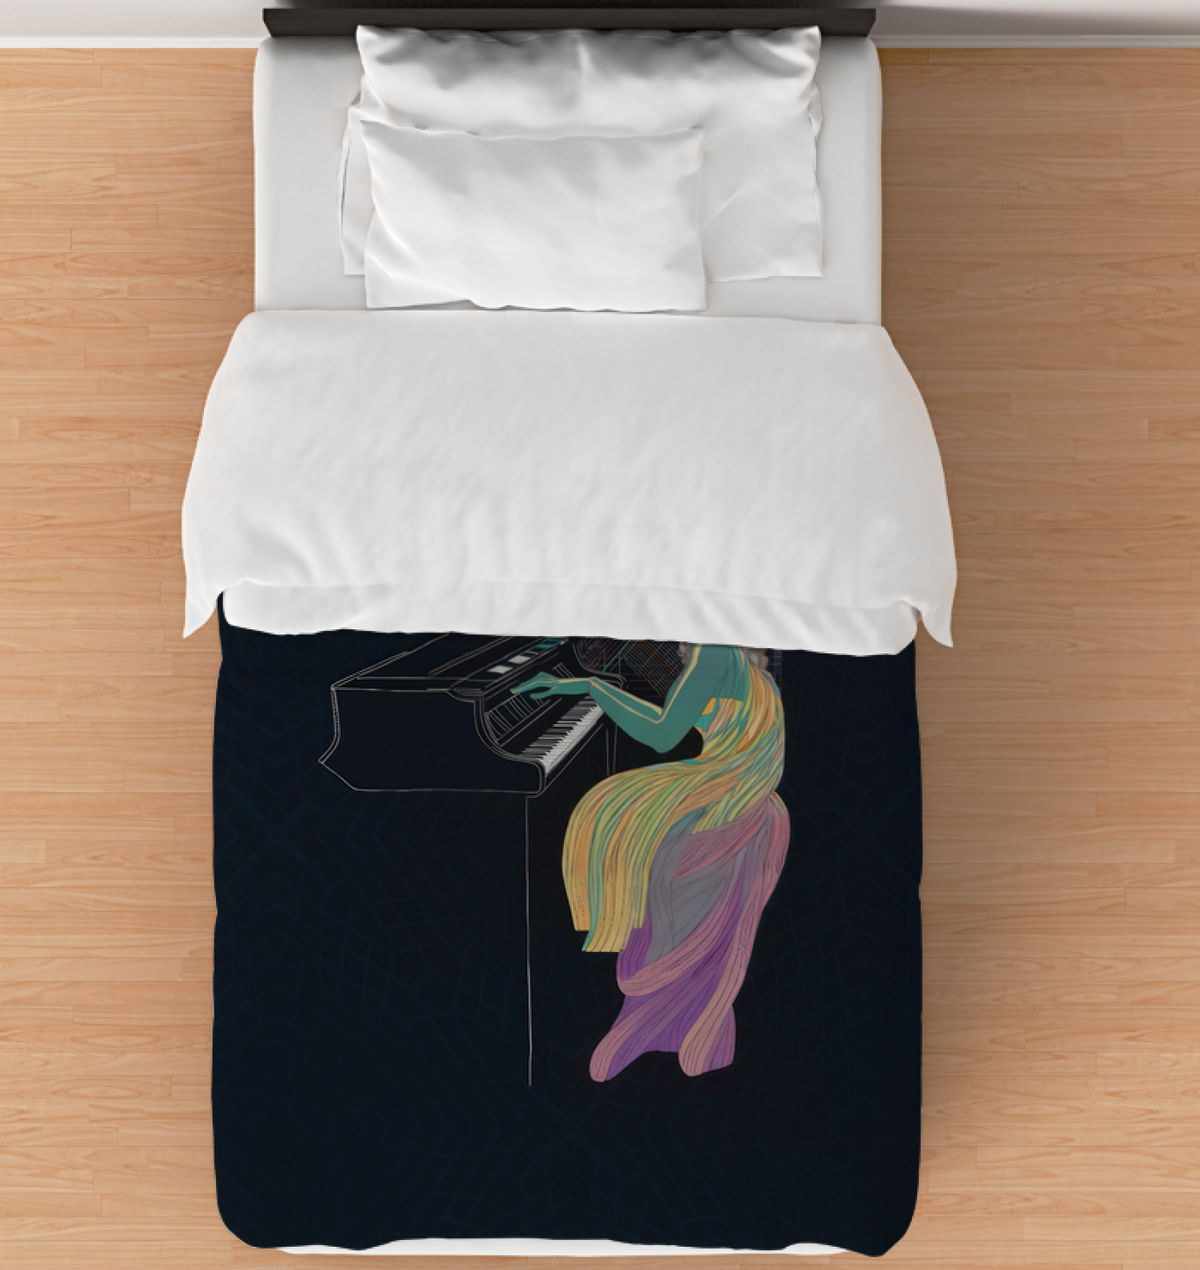 Blossom Ballet Comforter on a neatly made bed.